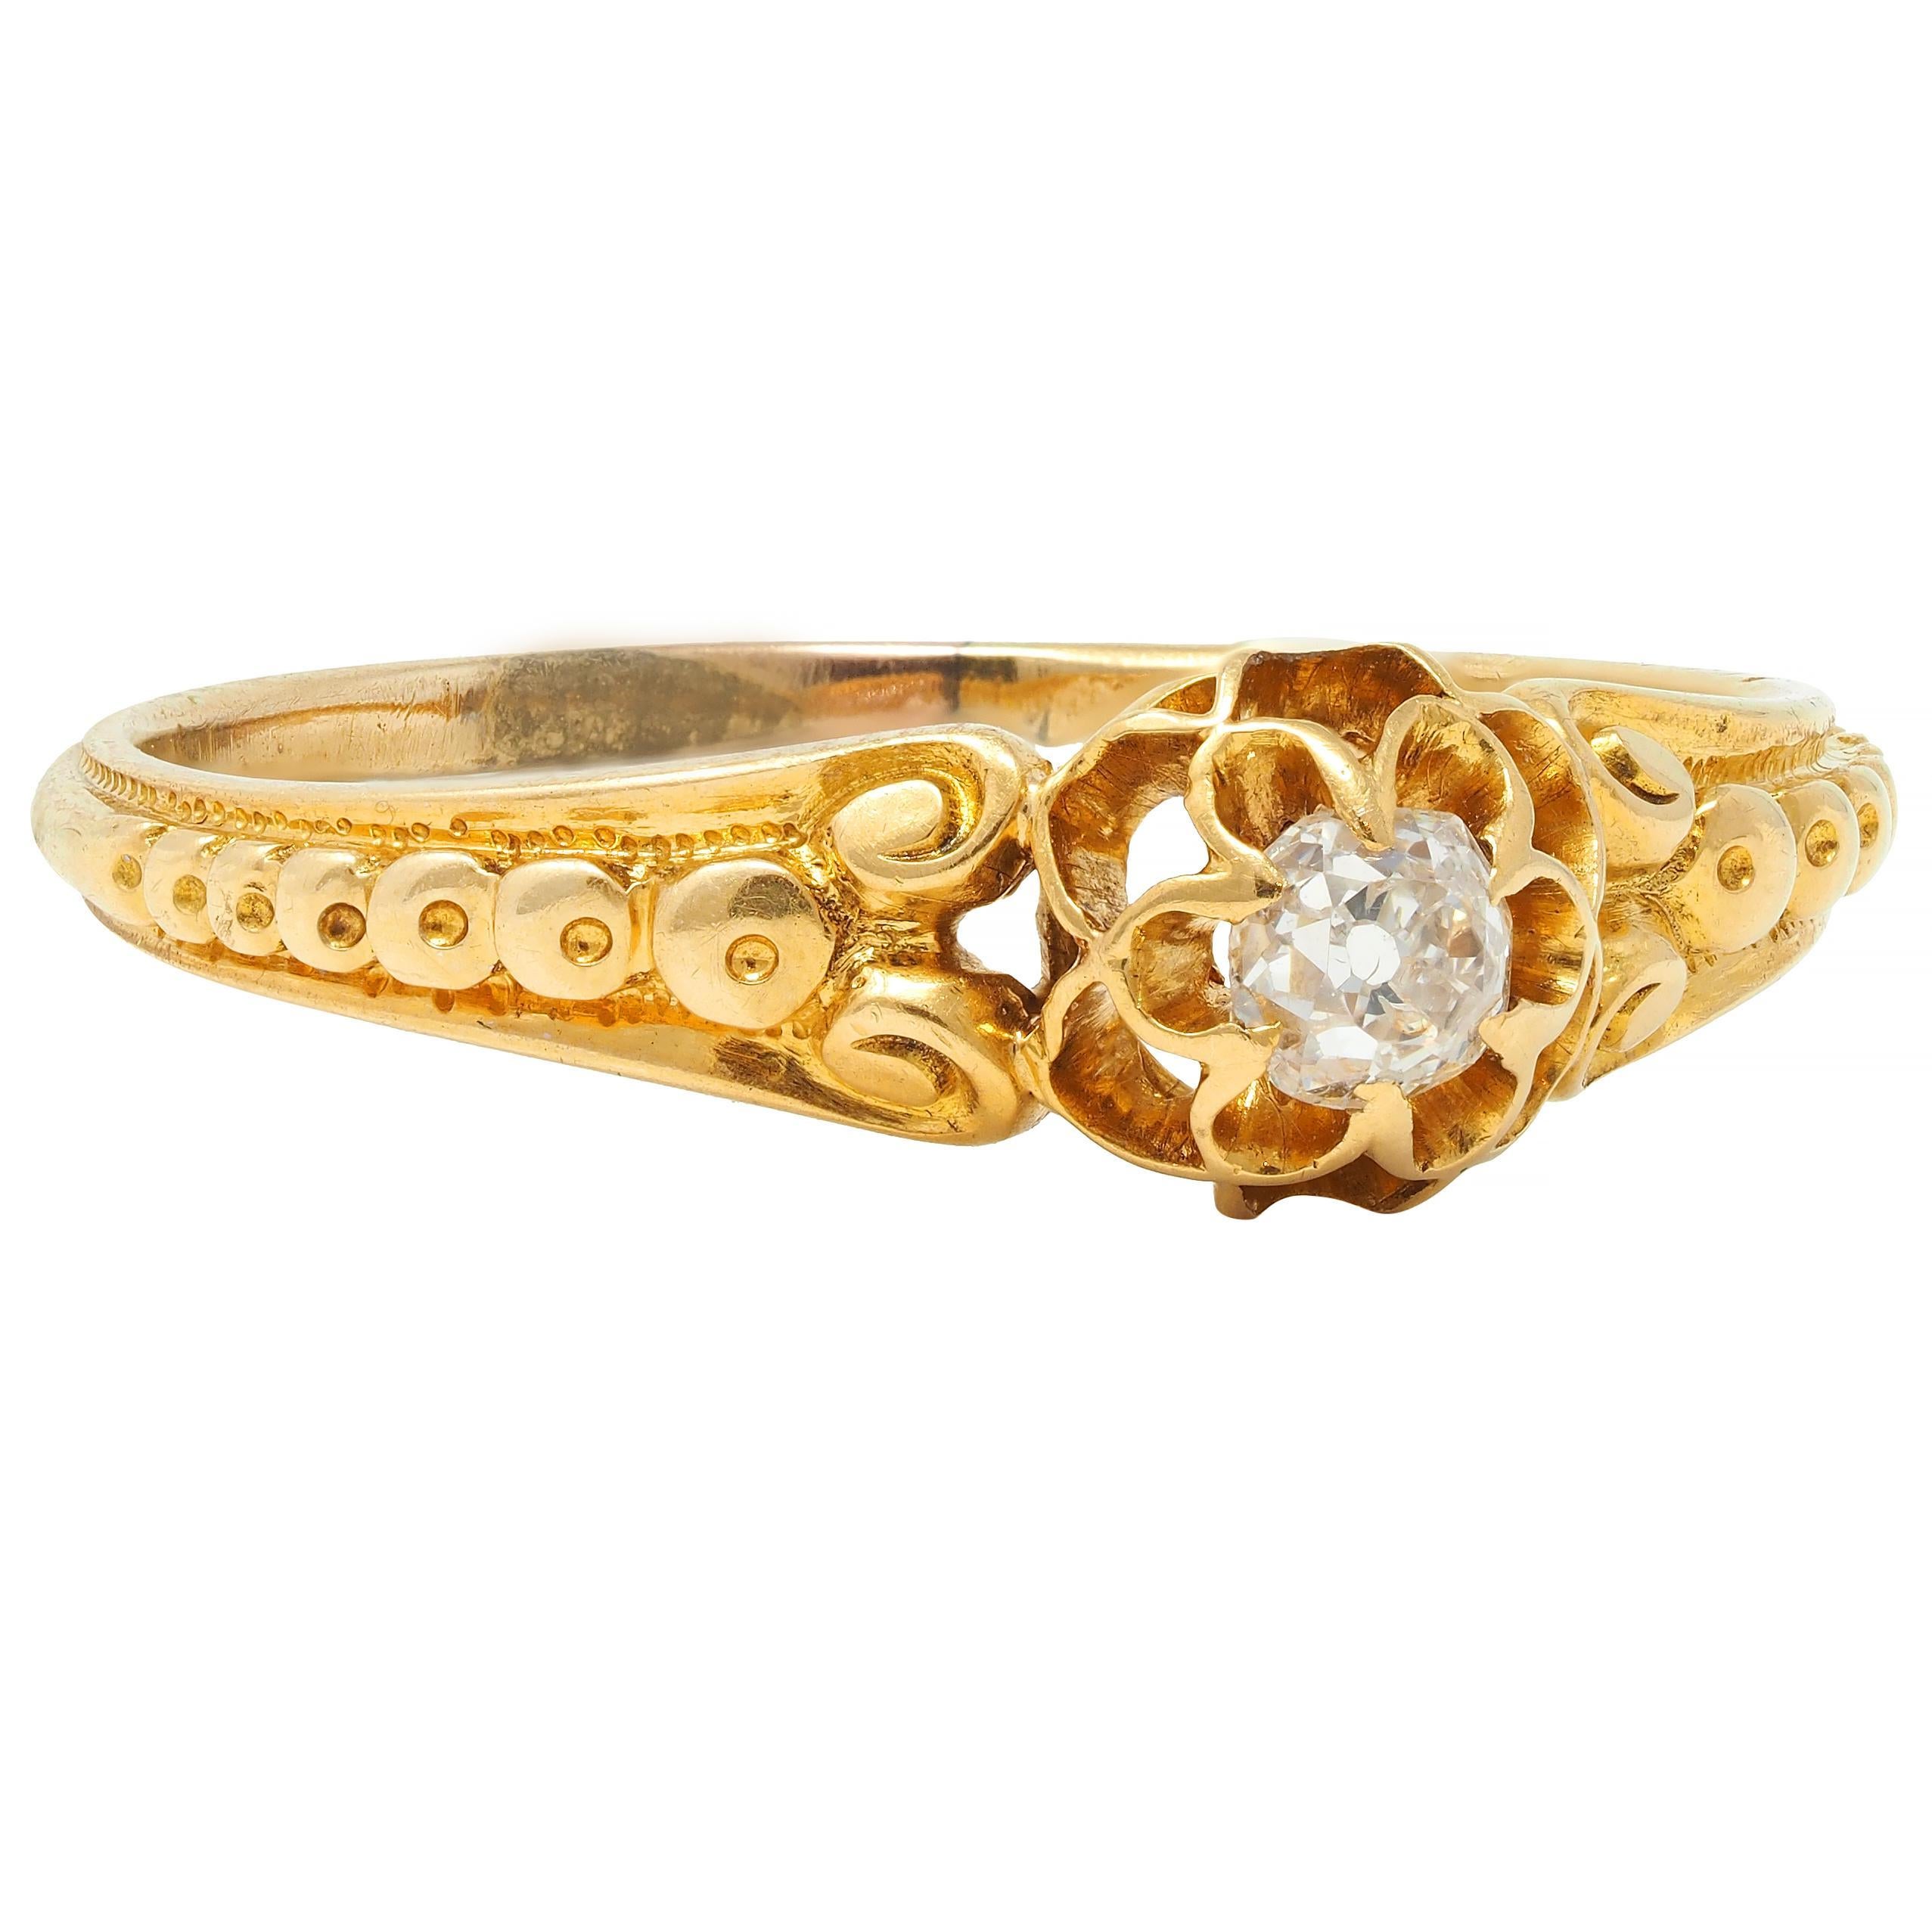 Centering and old mine cut diamond weighing approximately 0.15 carat total 
G color with VS2 clarity - set with buttercup motif belcher prongs 
With pierced gallery and flanked by scrolling volute shoulders
Accented by gold bead detailing 
Complete